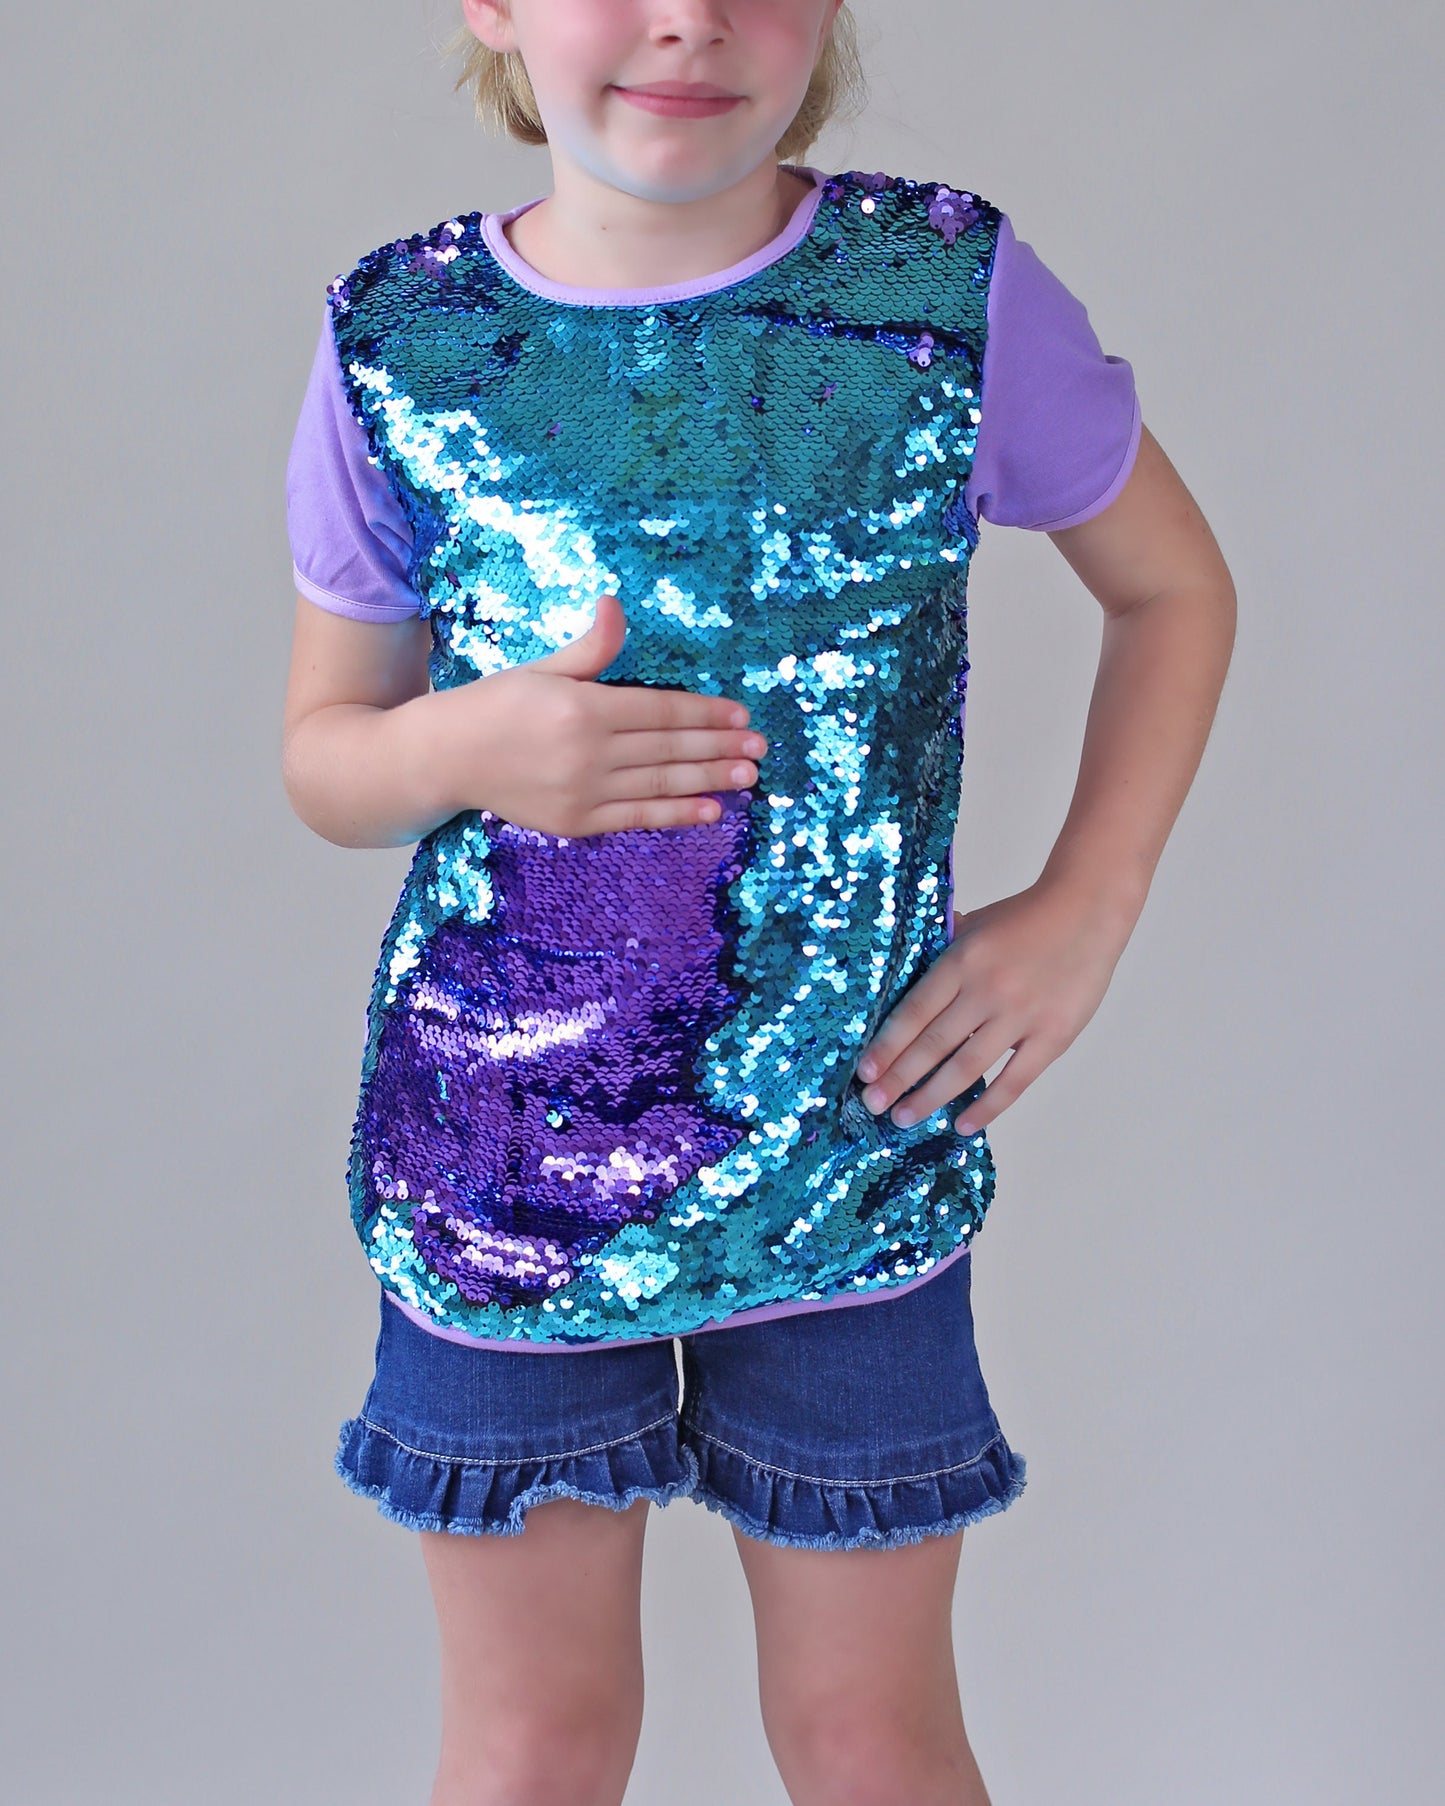 Turquoise and Lavender Reversible Sequined Shirt - Aqua and Purple flip Sequin Shirt - Lavender/Aqua Sequined Shirt - Magic Sequin Shirt